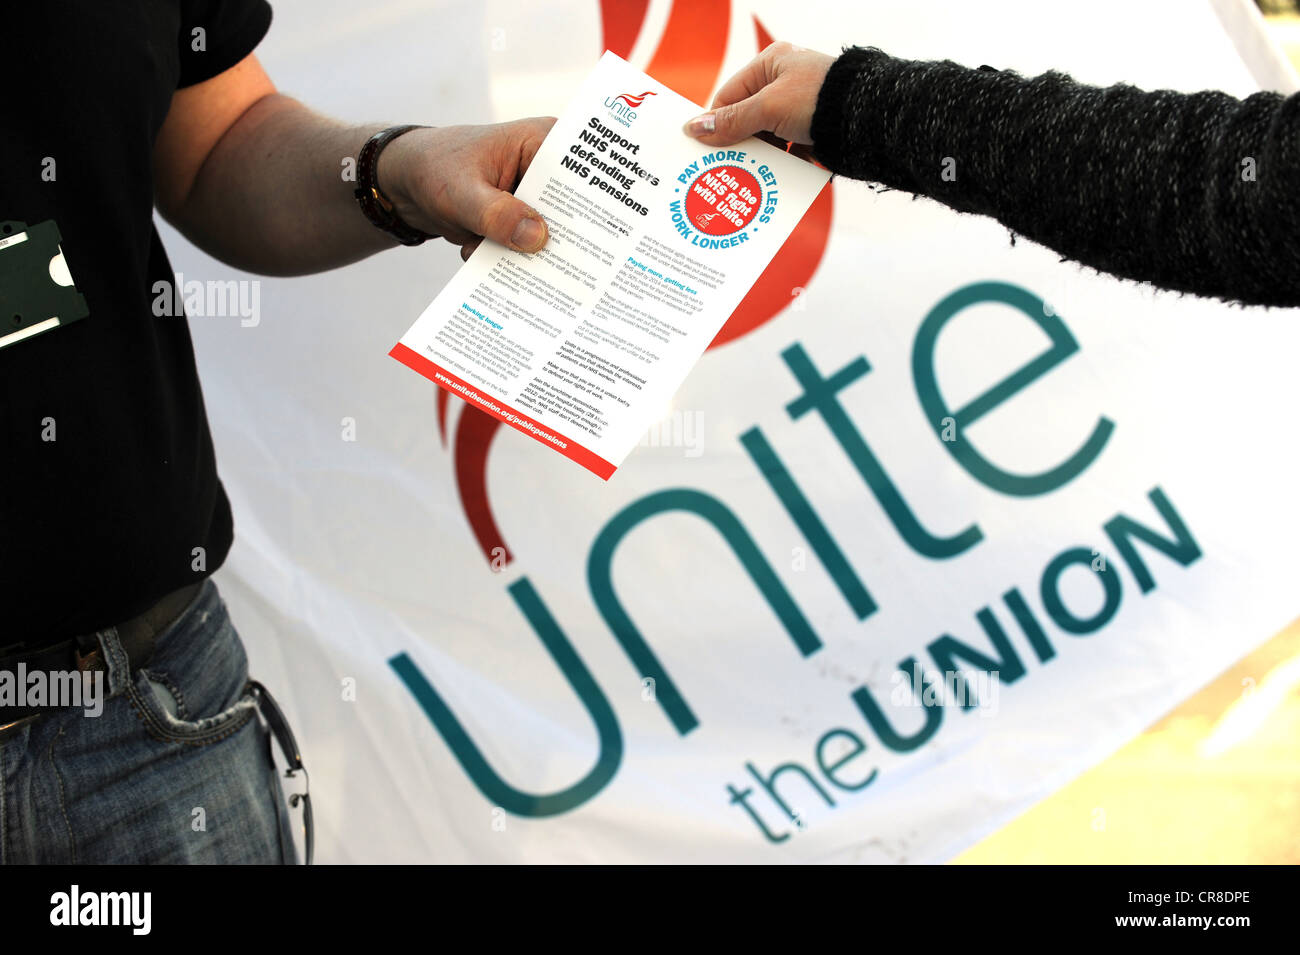 Unite union holding a protest about job cuts and pensions outside the Royal Sussex County Hospital handing out leaflets Stock Photo